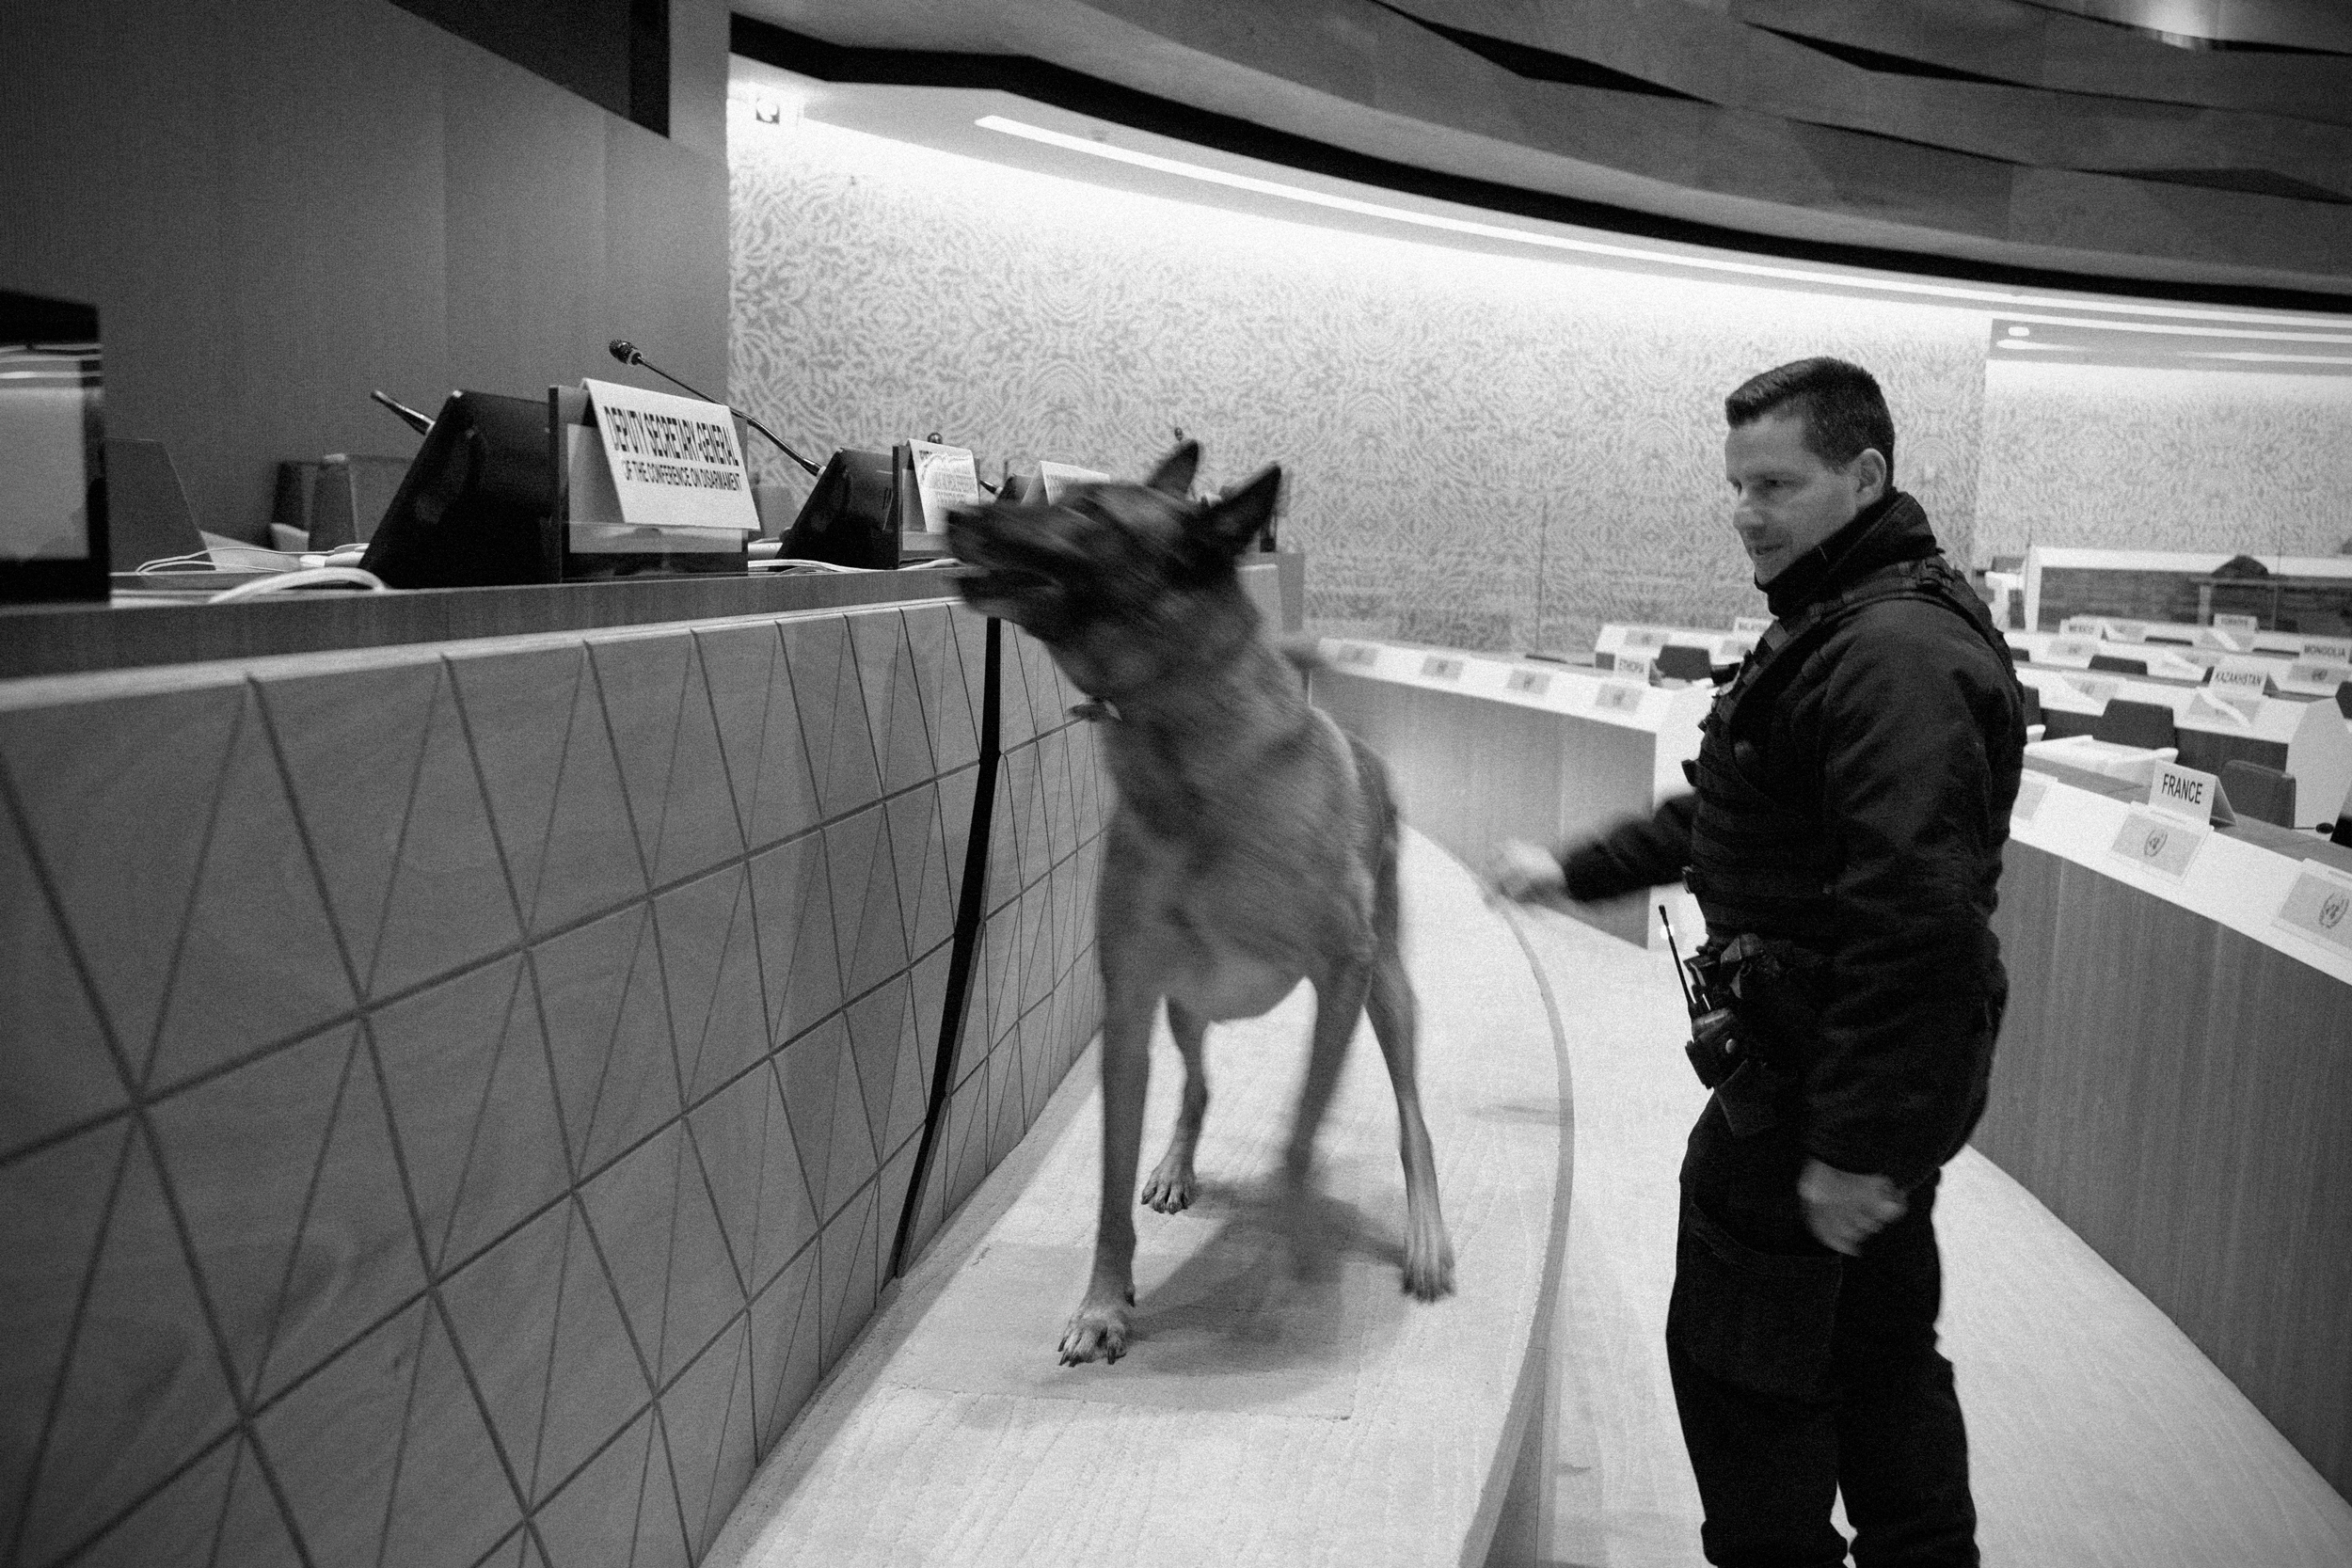 A photo showing a conference room with rows of empty desks and chairs. A dog is sniffing one of the chairs, while a Security and Safety Service officer stands nearby.